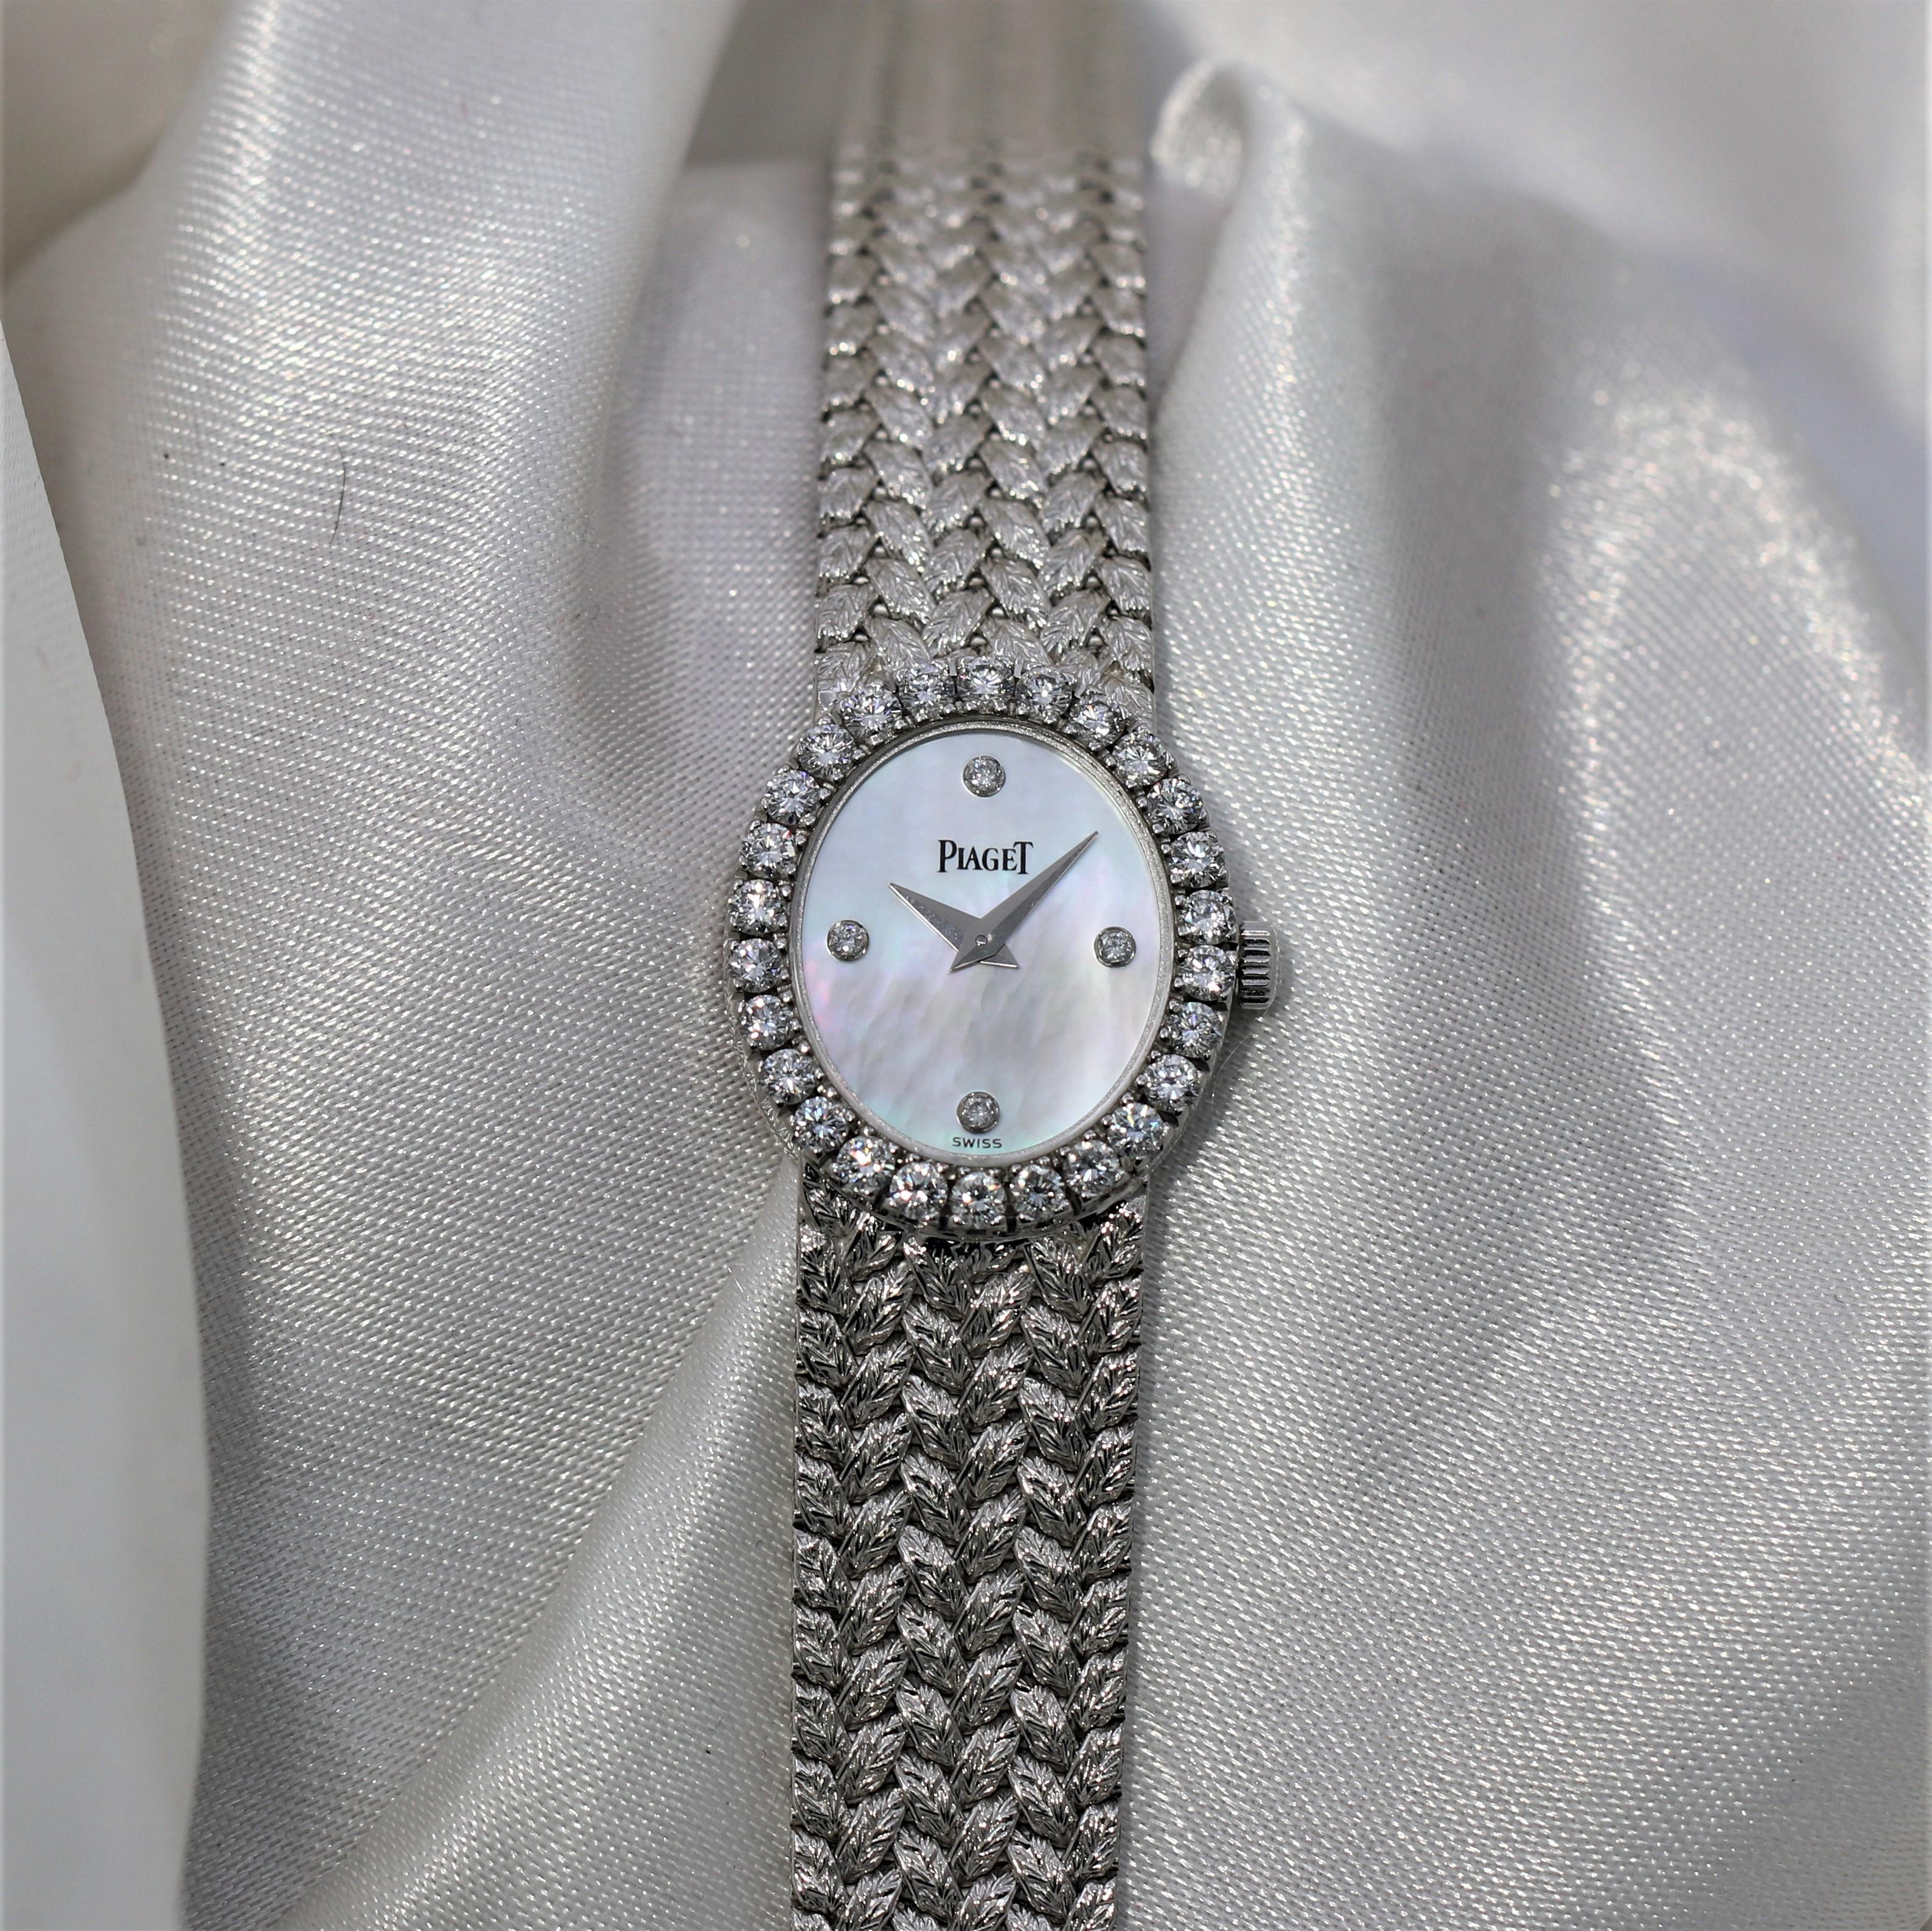 Ladies Piaget Petite Mother of Pearl Diamond Dial, White Gold Woven Band Watch 2